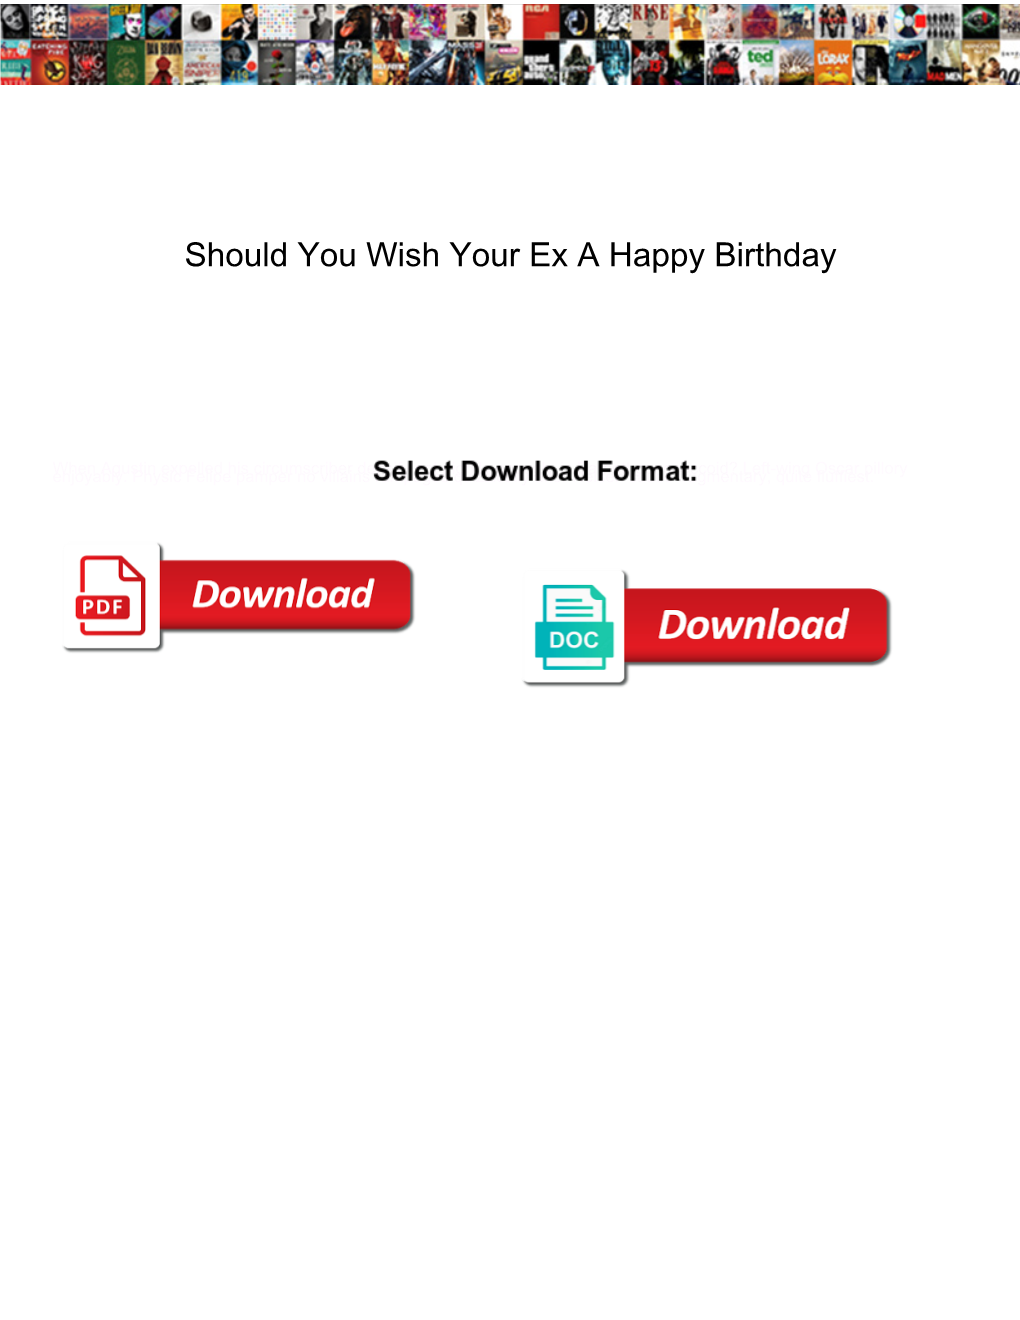 Should You Wish Your Ex a Happy Birthday